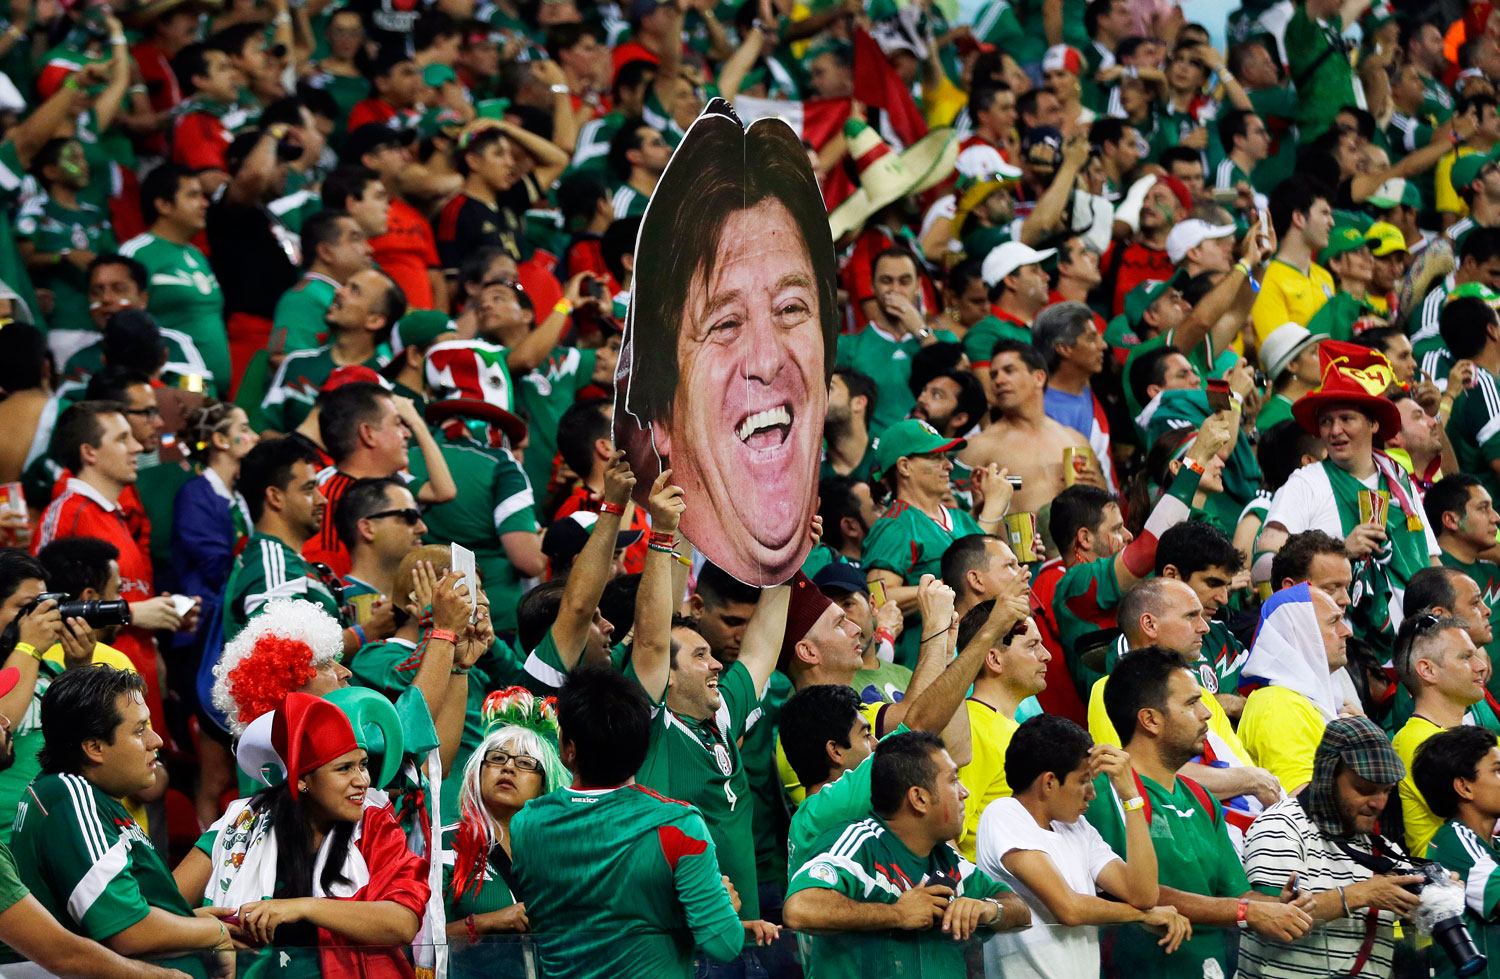 Mexico's fans celebrate holding a mask of Mexico's head coach Miguel Herrera after the match between Croatia and Mexico at the Arena Pernambuco in Recife, Brazil on June 23, 2014.